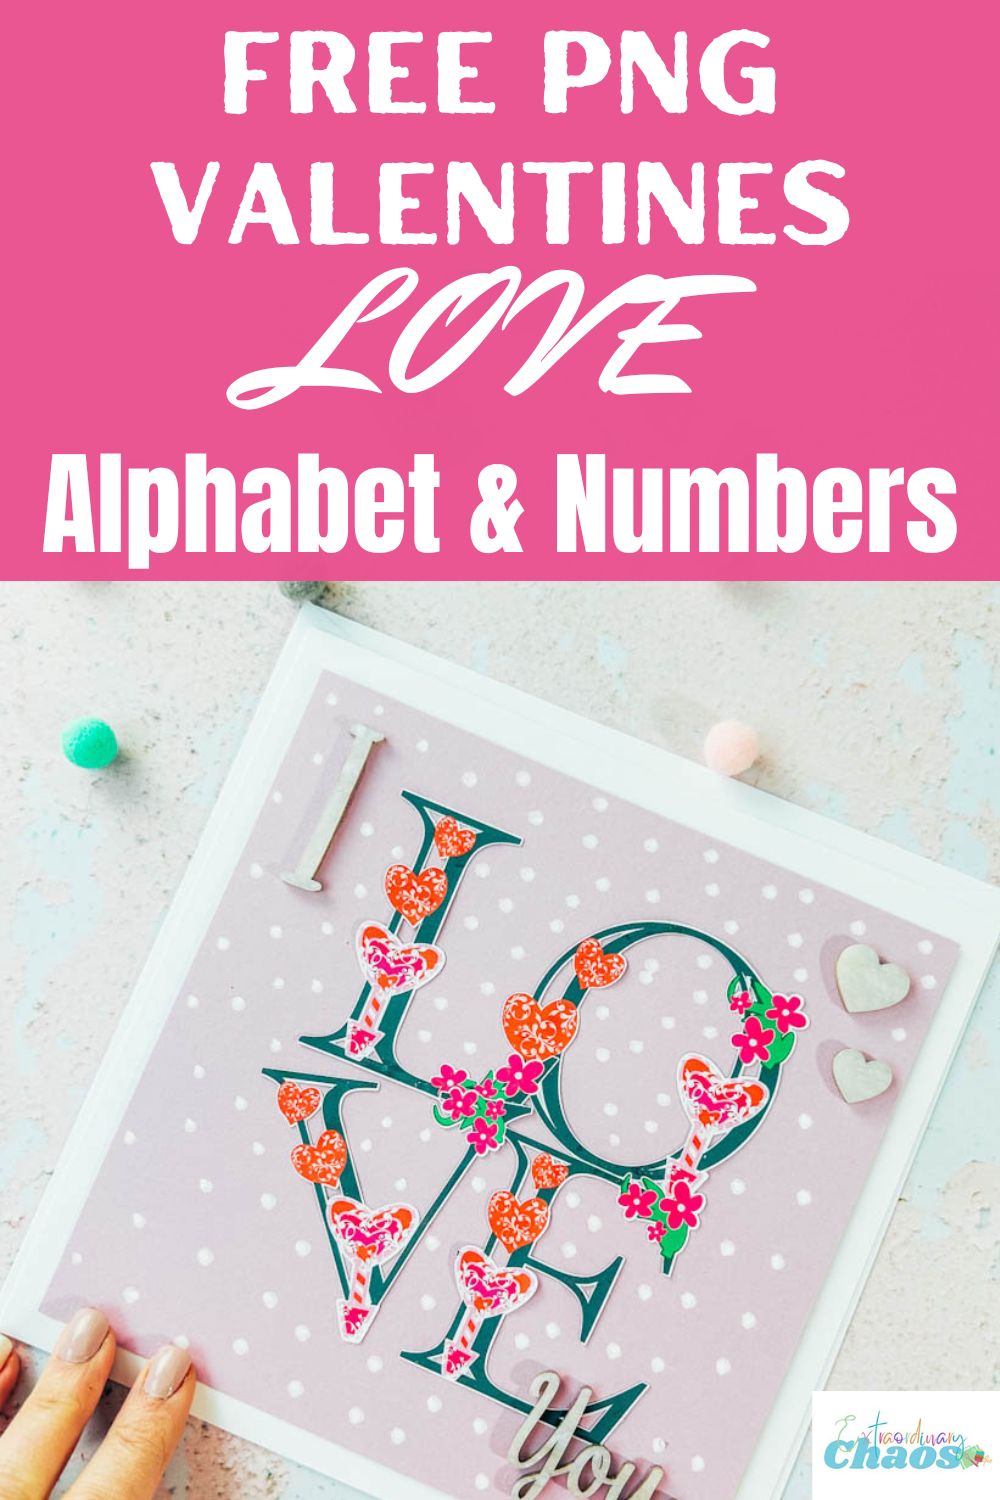 Printable Hearts and Flowers PNG Alphabet letters and numbers